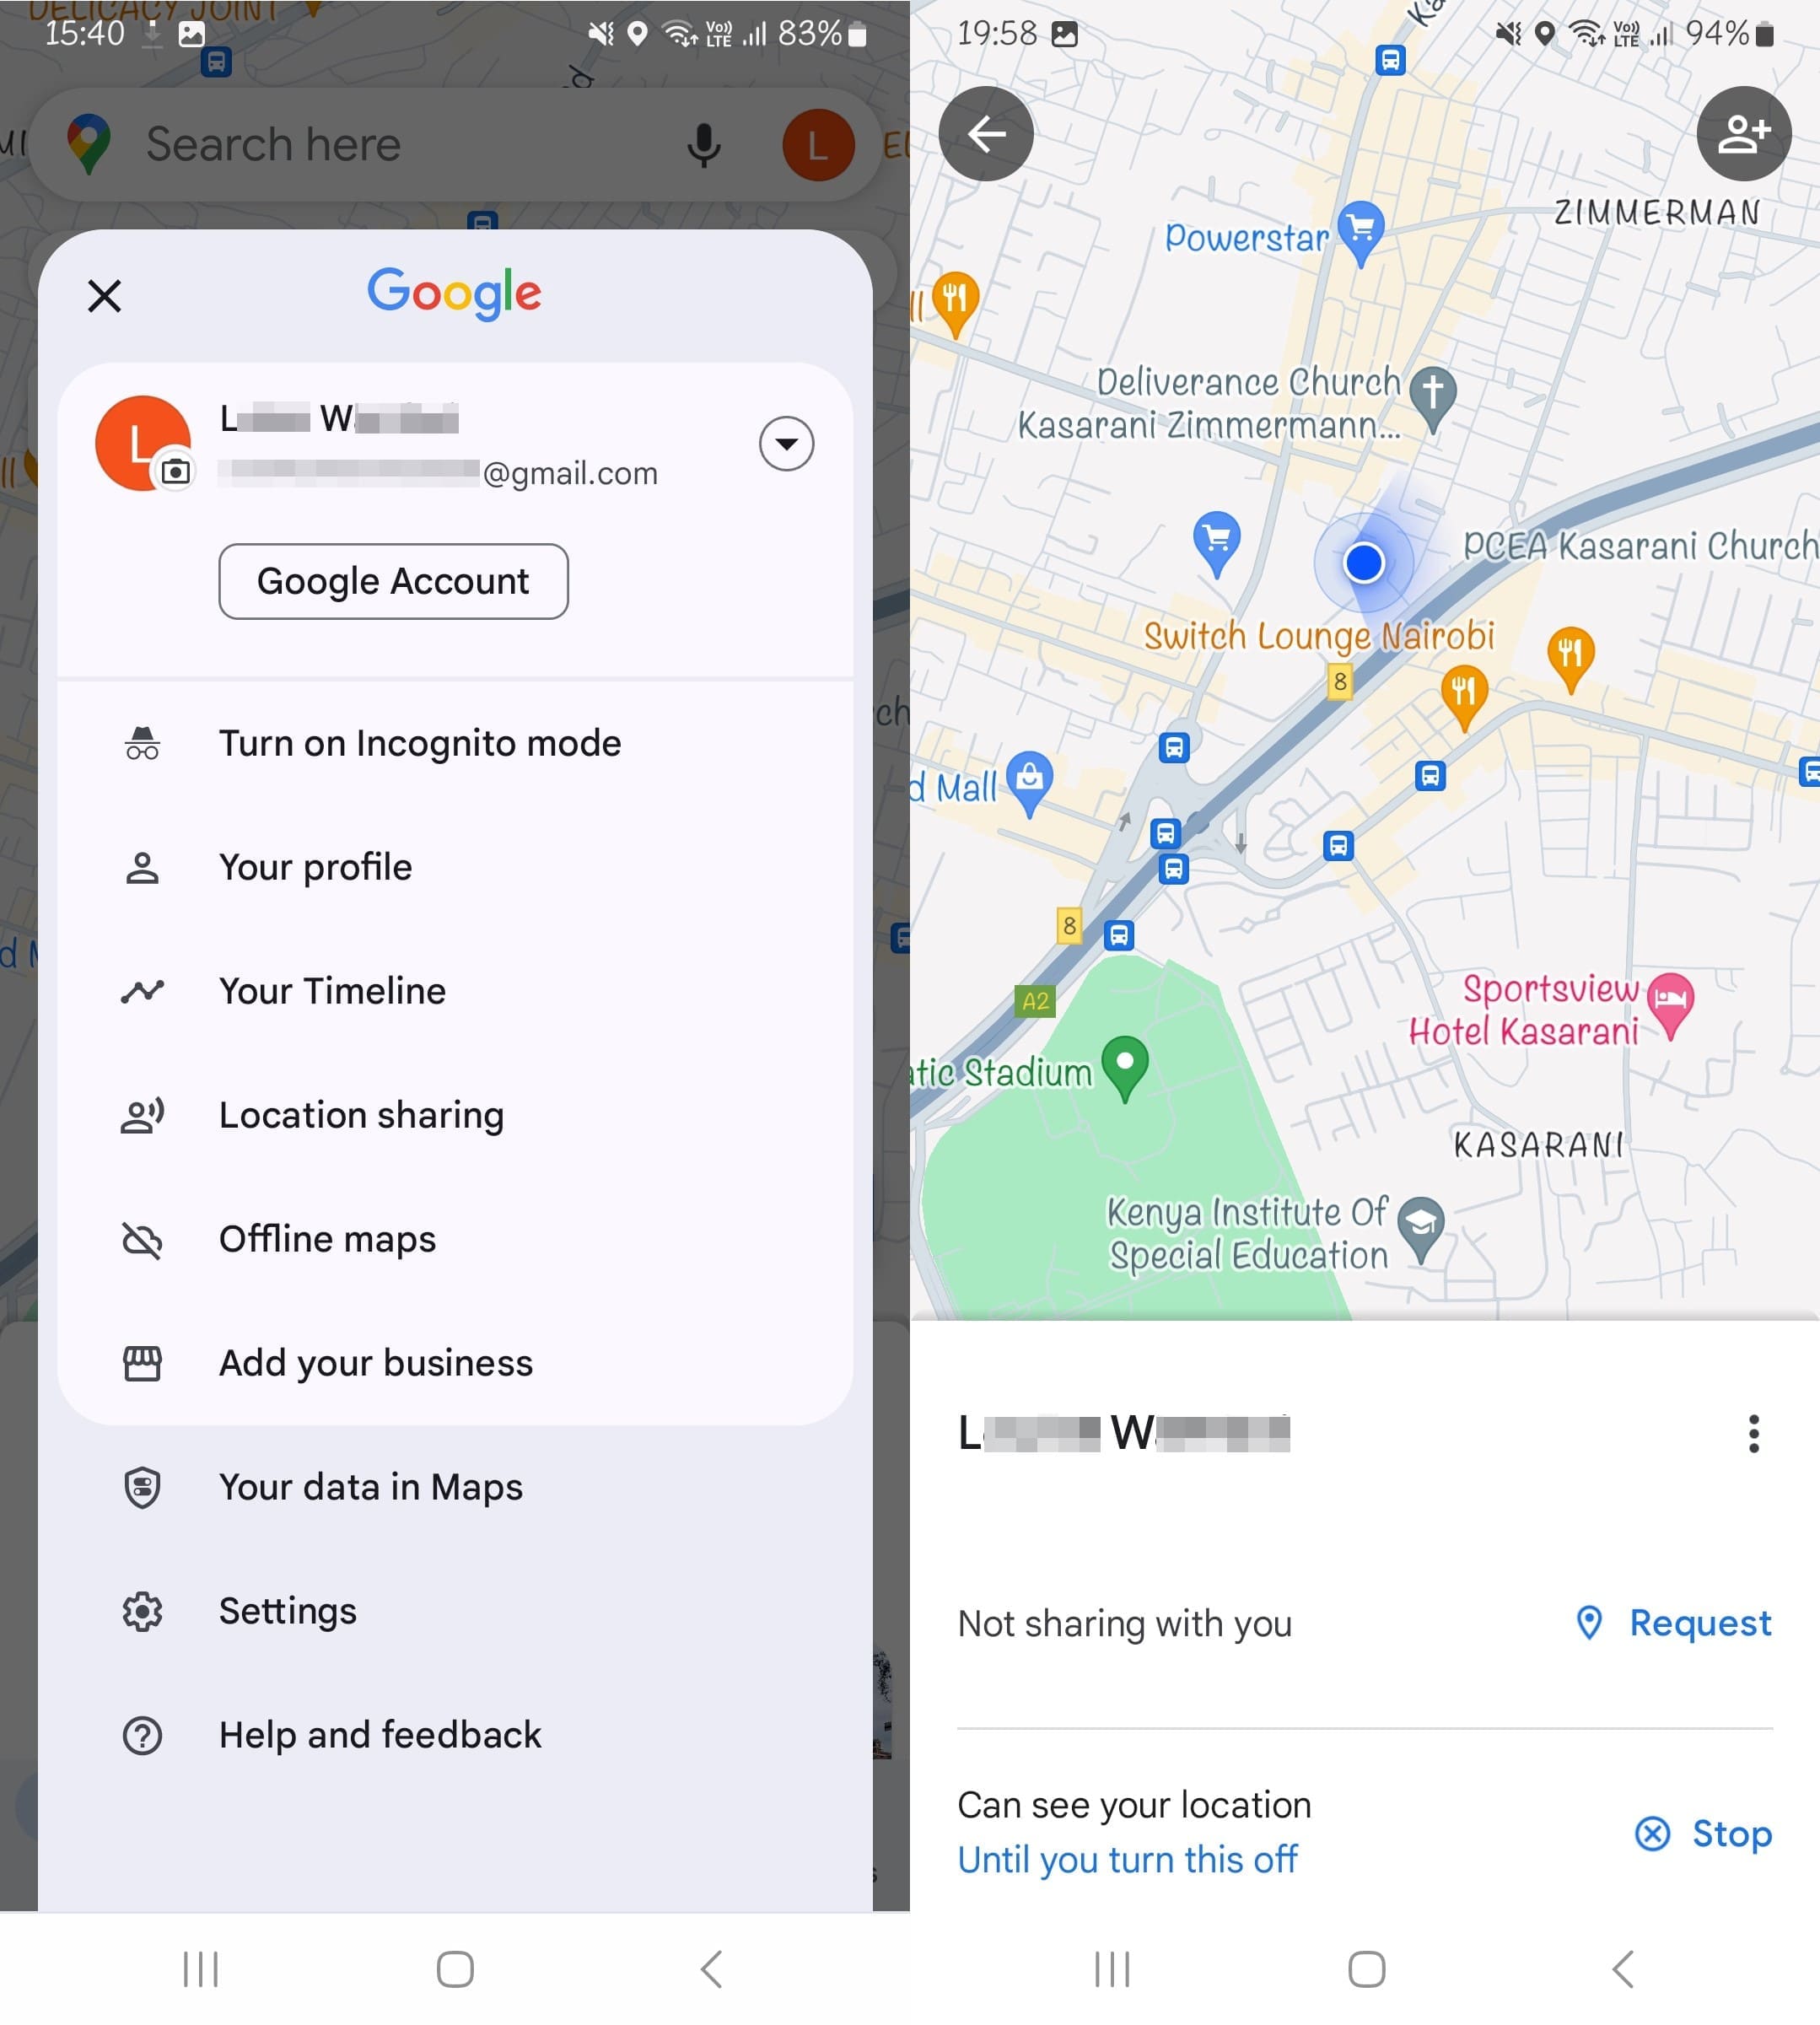 How to access location sharing to request location sharing from another person